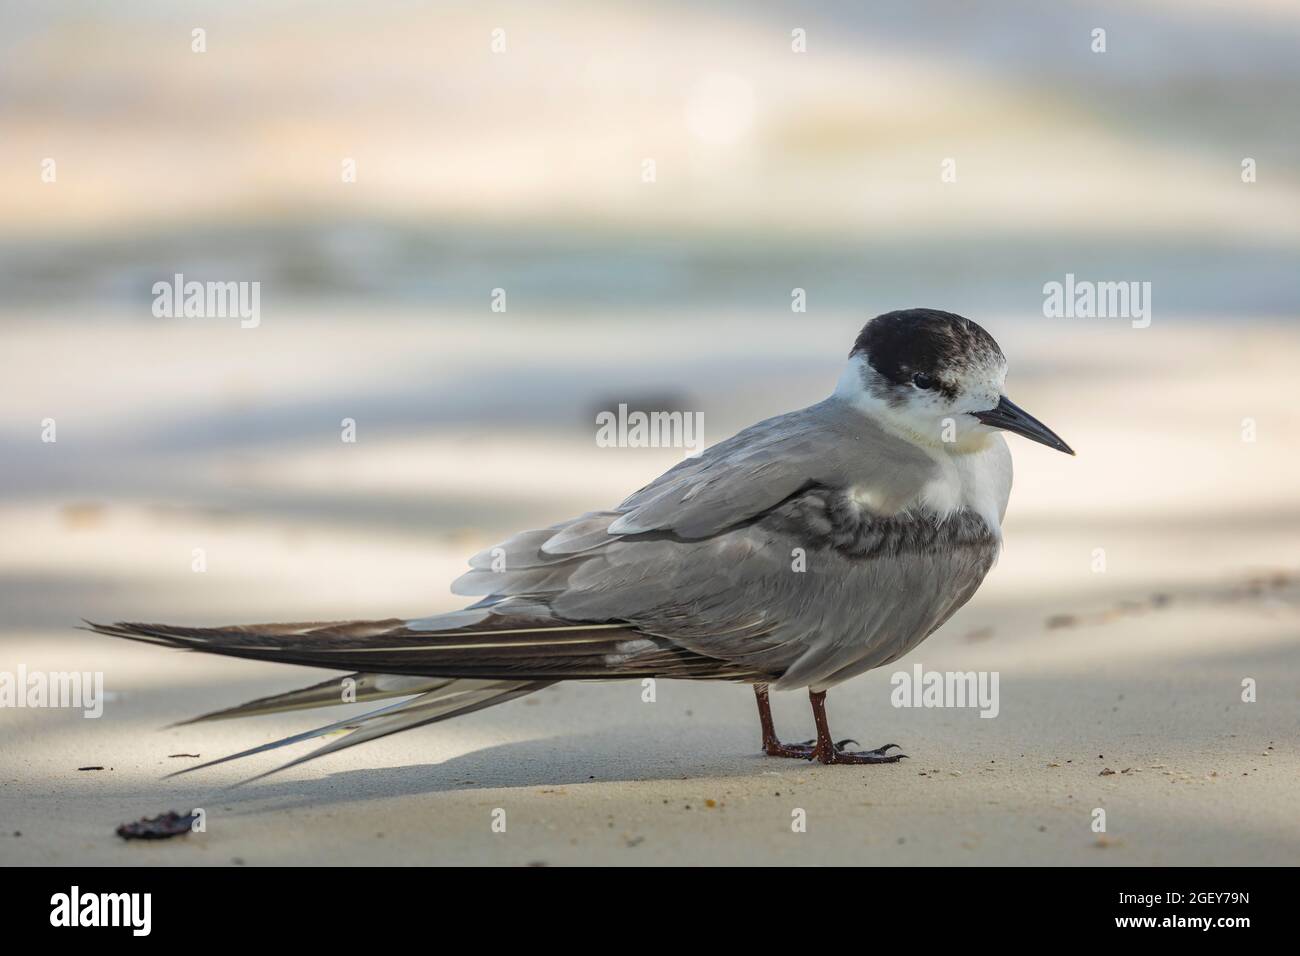 A seabird, a black-billed common tern, watches from the sand on the north beach of Friwin Island, Raja Ampat, West Papua, Indonesia Stock Photo